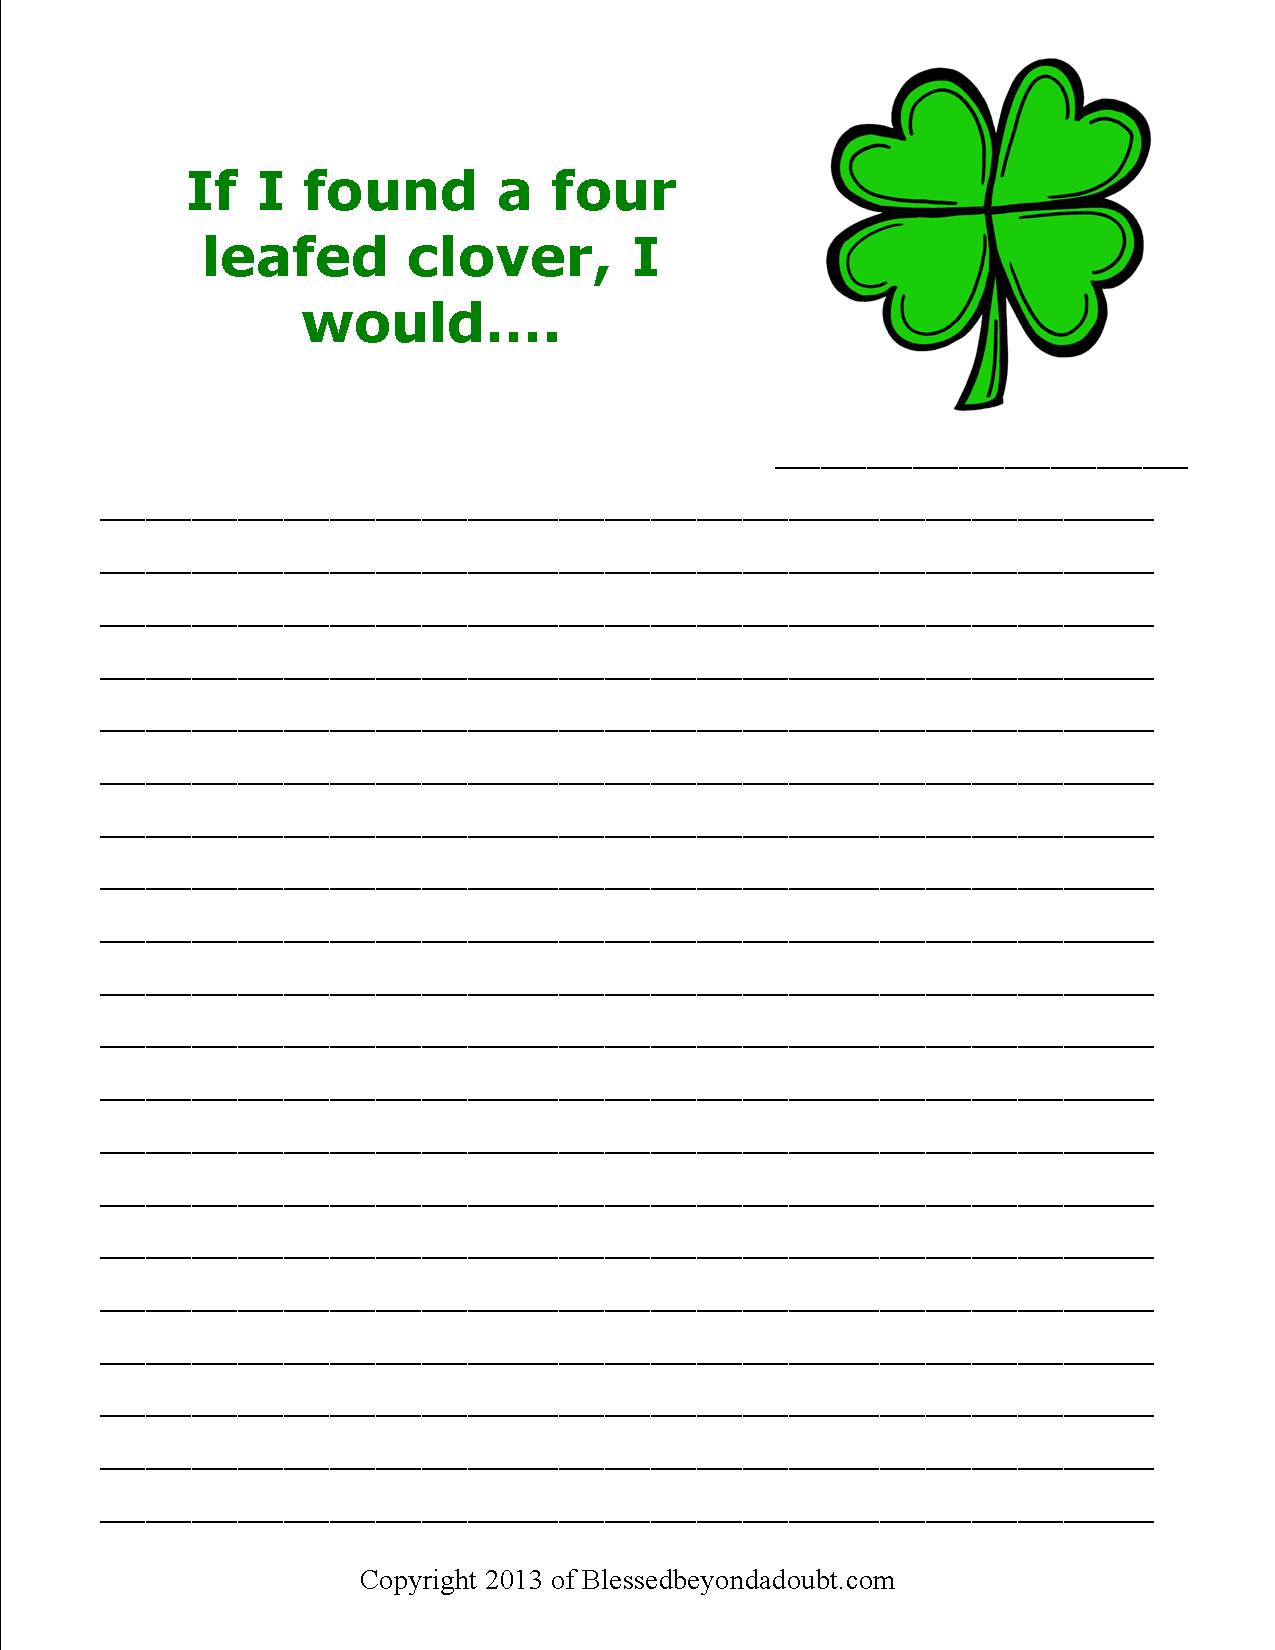 FREE St Patrick s Day Writing Prompts Super CUTE 